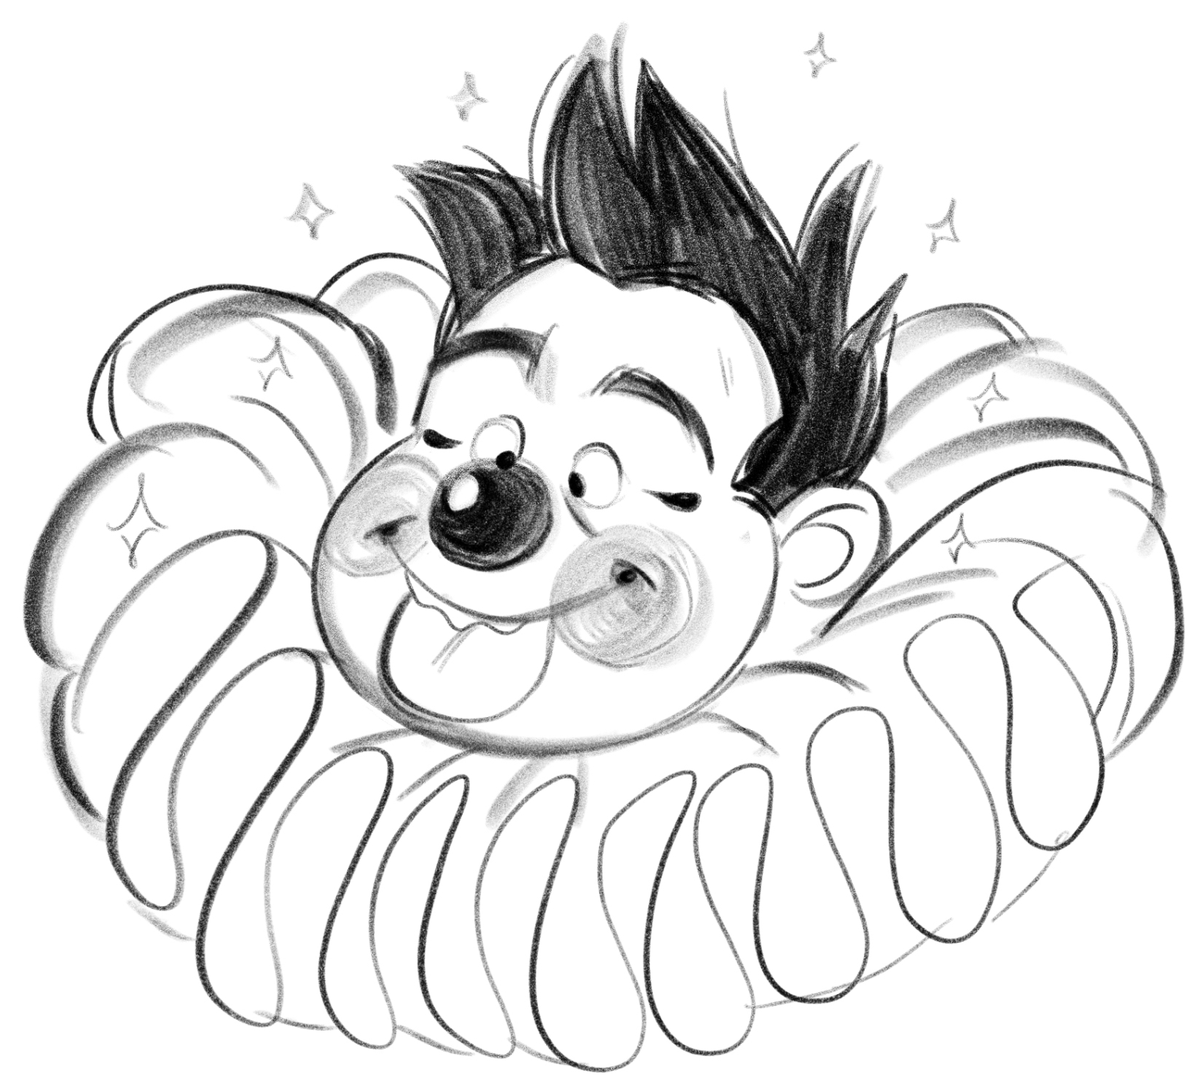 Some more Red Rouser before working on commissions ~ #clown #clowns #clowncore #clownoc #oc #doodle #sketch 